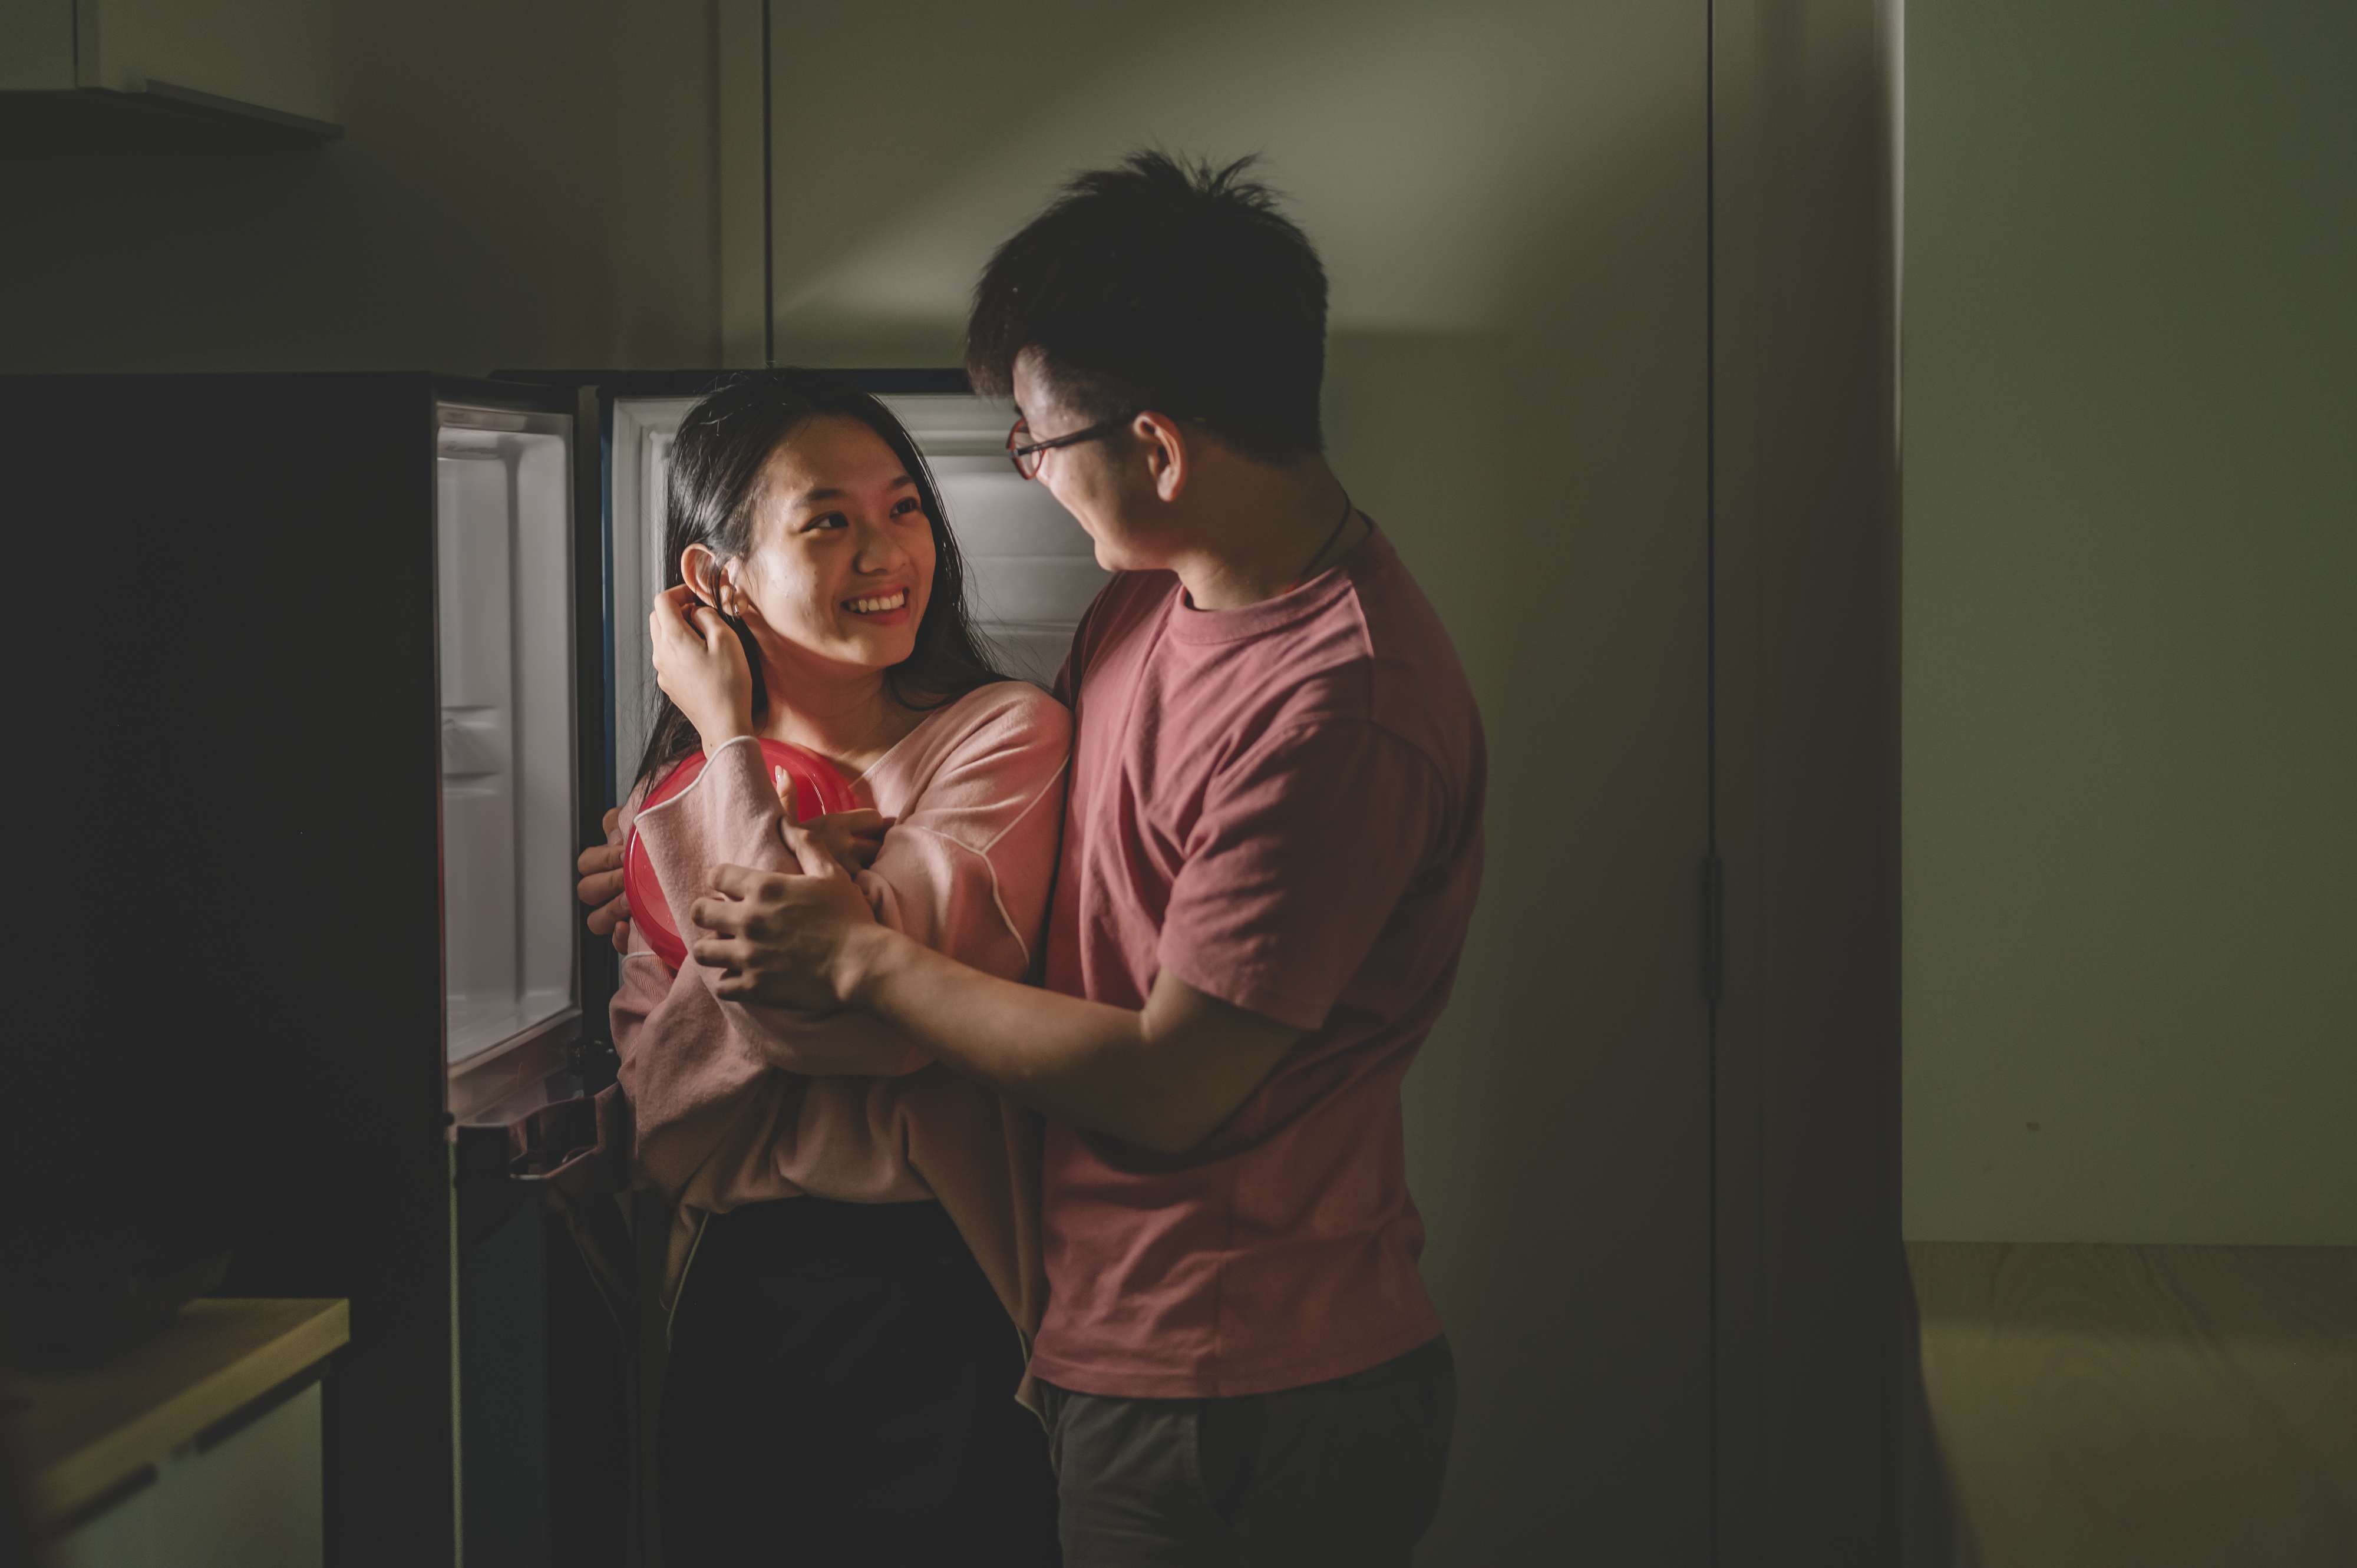 A couple engaging in a playful, romantic moment in a kitchen